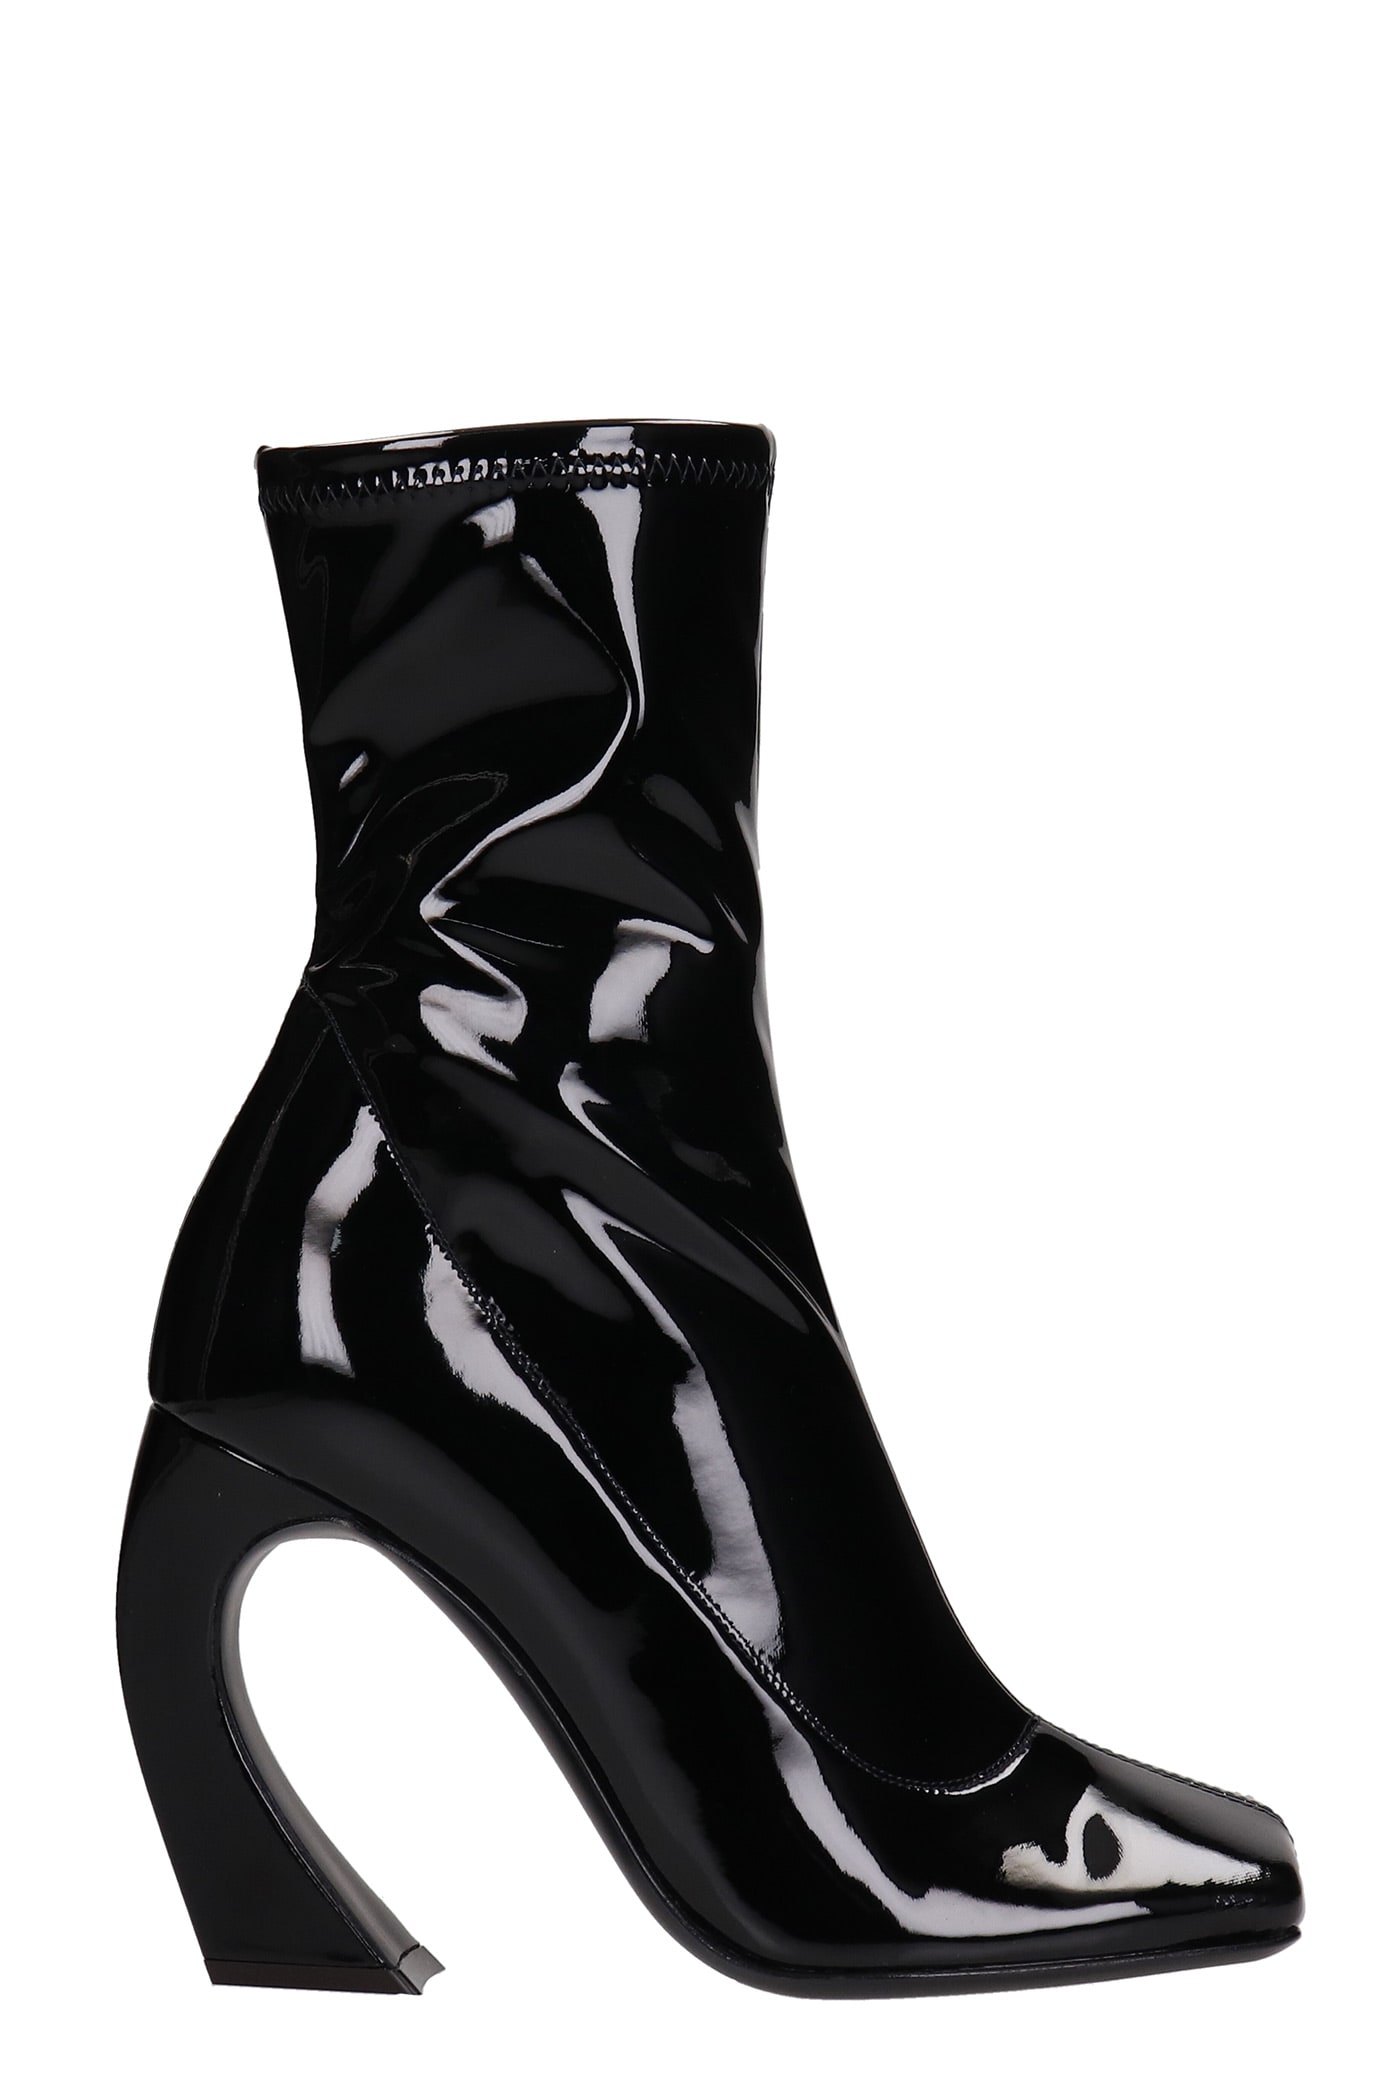 Giuseppe Zanotti High Heels Ankle Boots In Black Patent Leather